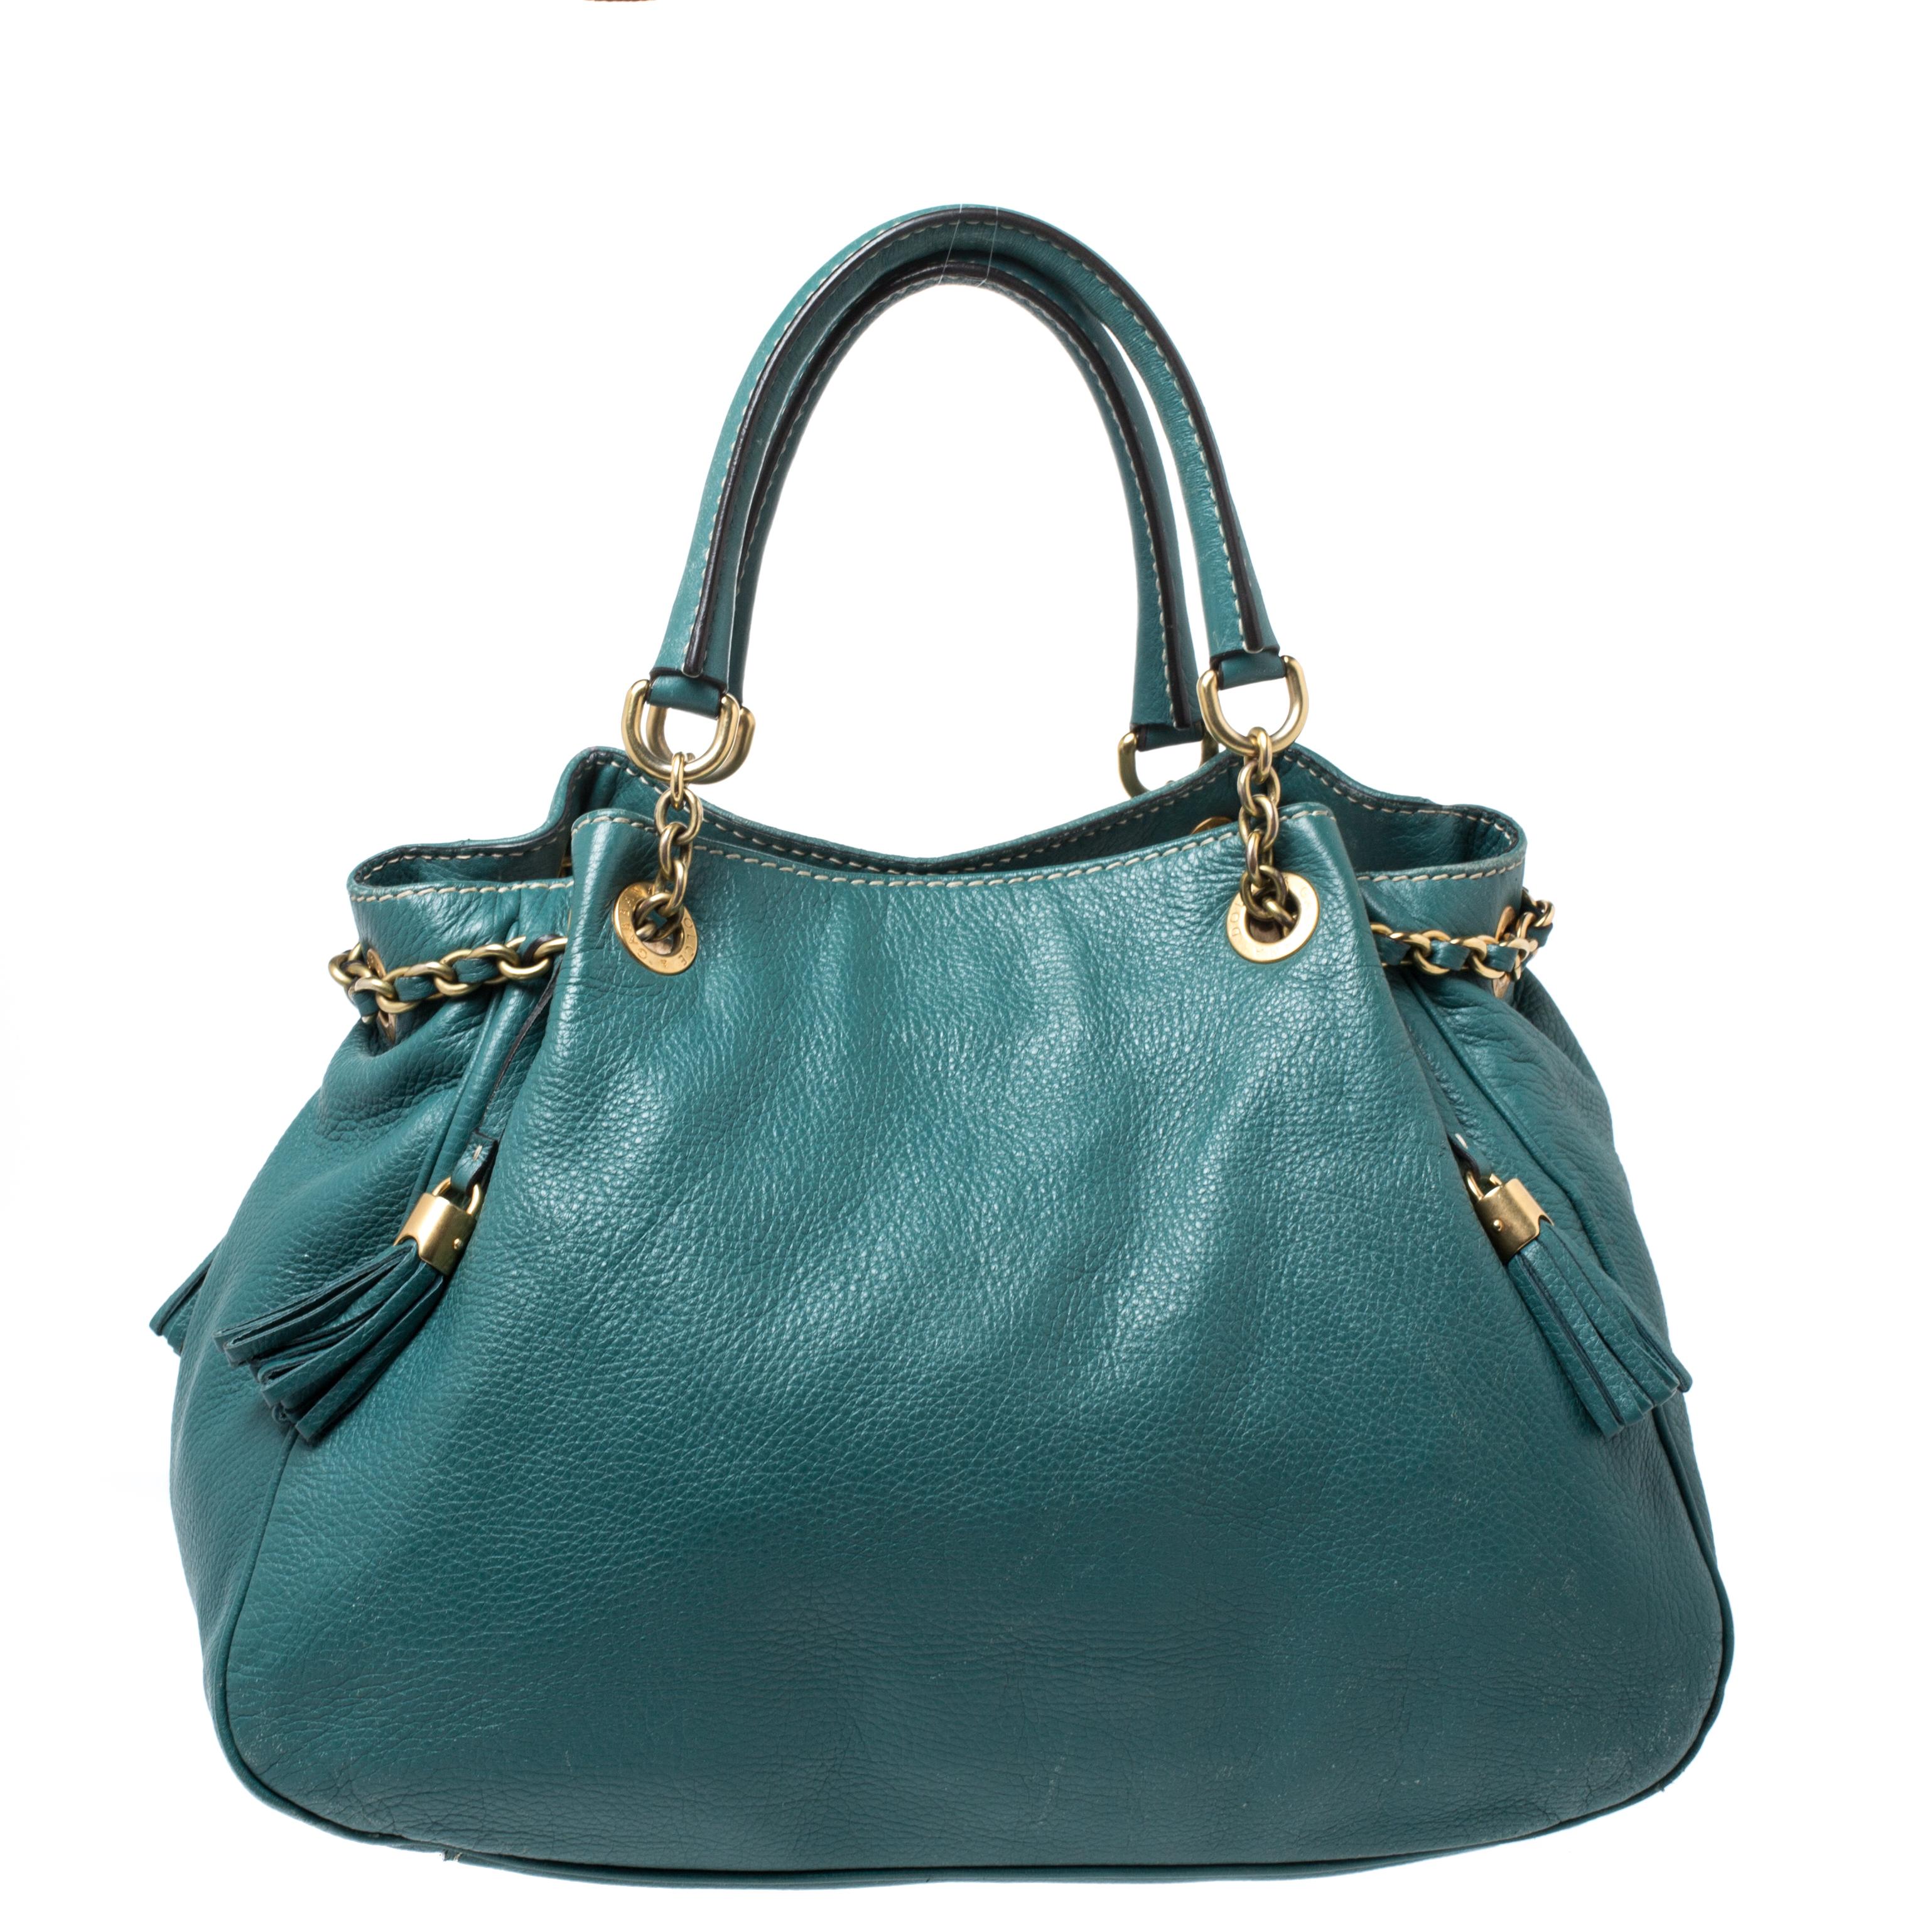 This stunning masterpiece is a must-have. Dolce & Gabbana delivers a chic style with this Miss Charlotte satchel Crafted in Italy, it is made of quality leather and comes in a lovely shade of green. It is styled with dual handles embellished with